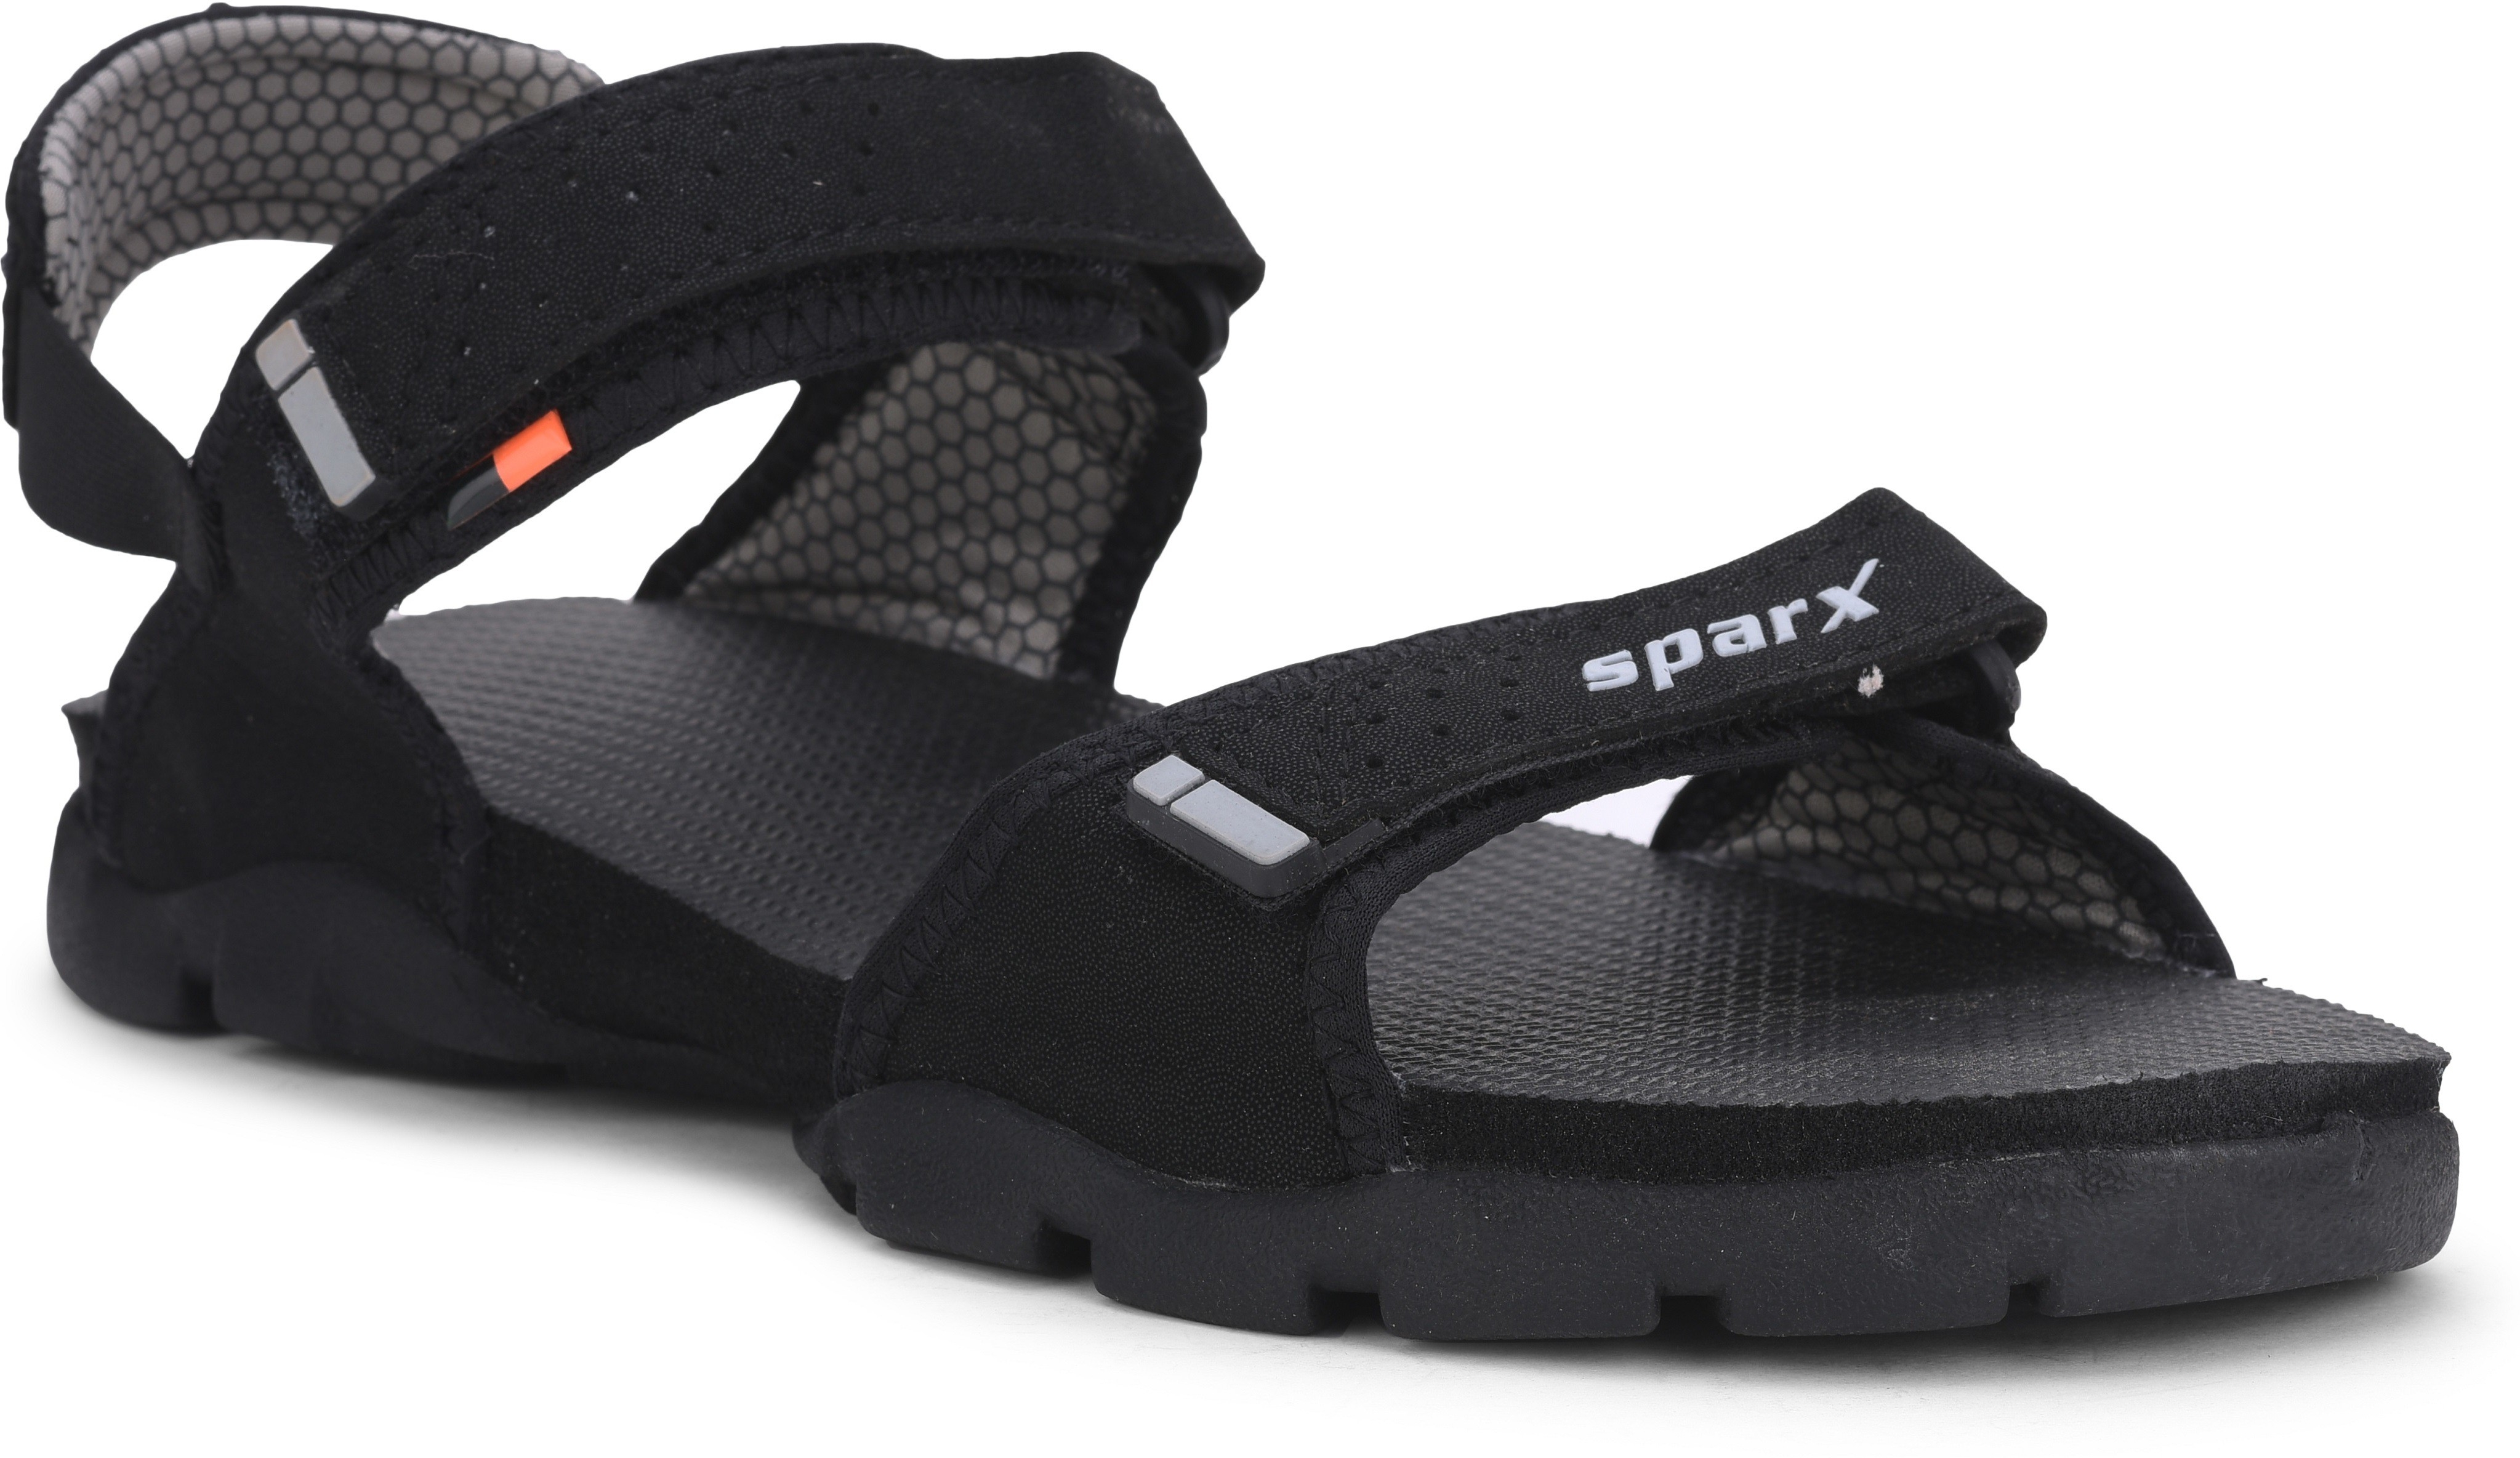 2021 Lowest Price] Sparx Men Sandals Price in India & Specifications